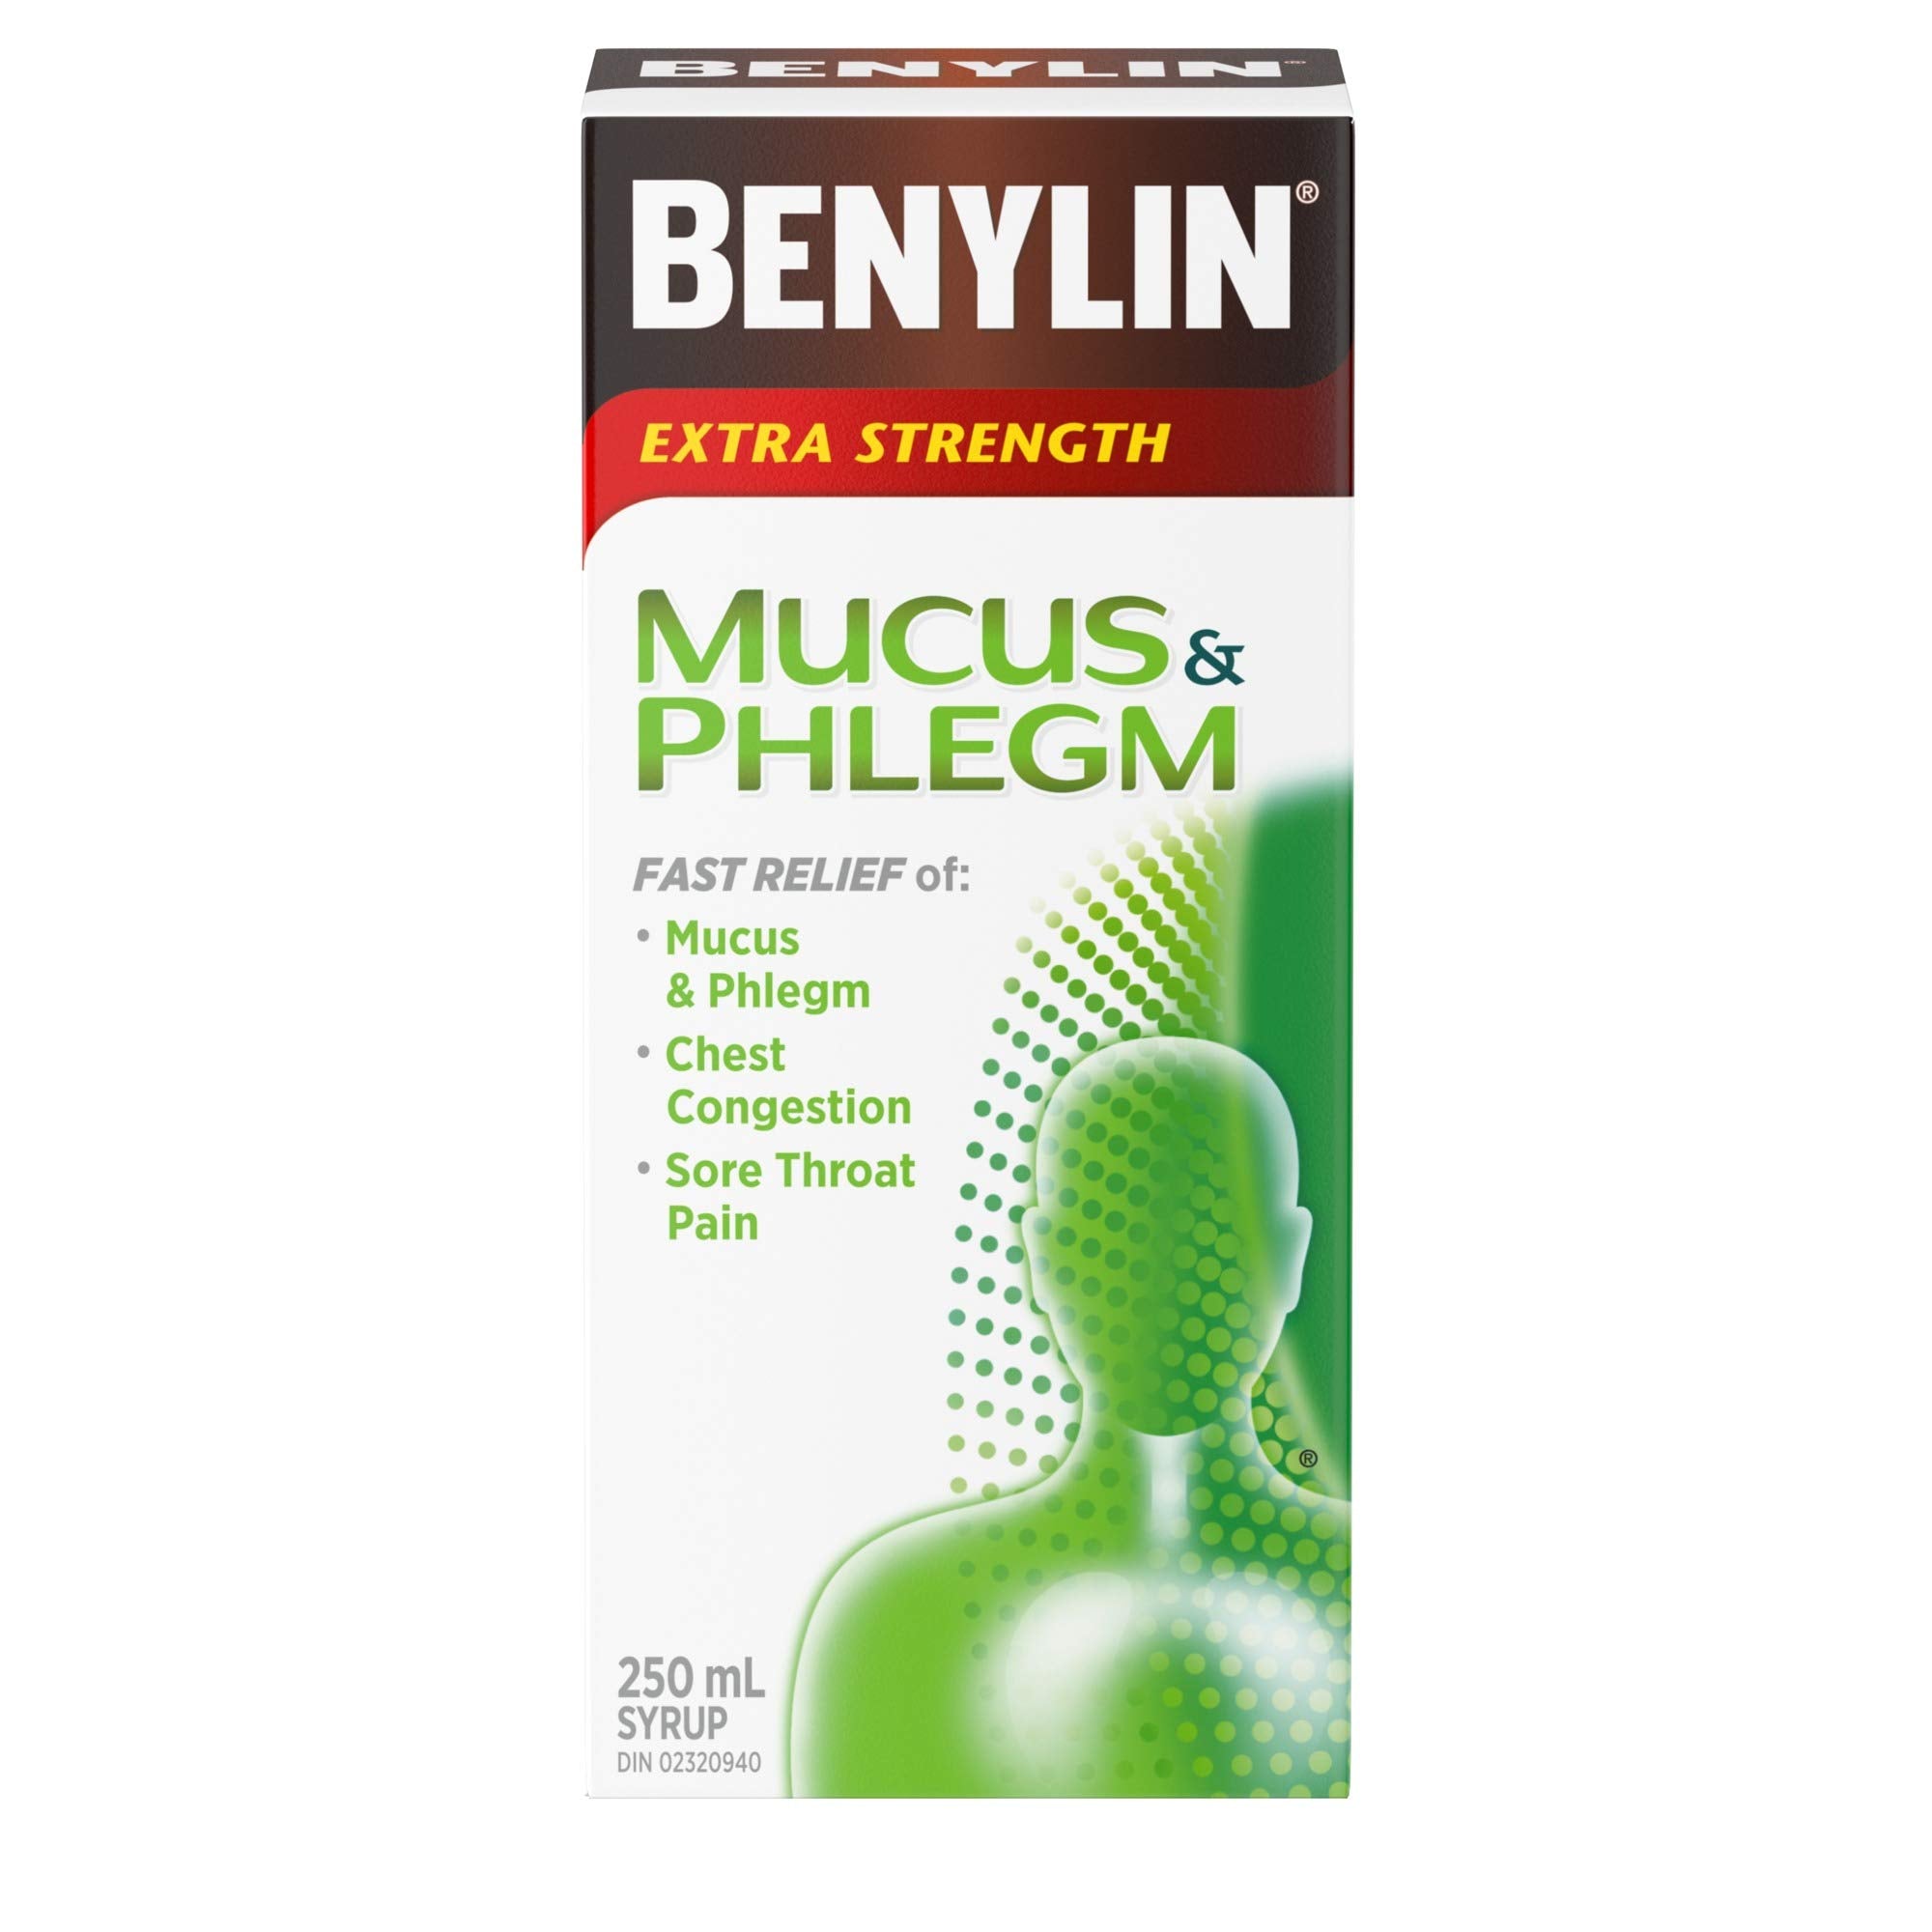 BENYLIN Extra Strength Mucus and Phlegm Syrup, Relieves Chest Congestion and Mucus and Phlegm 250mL